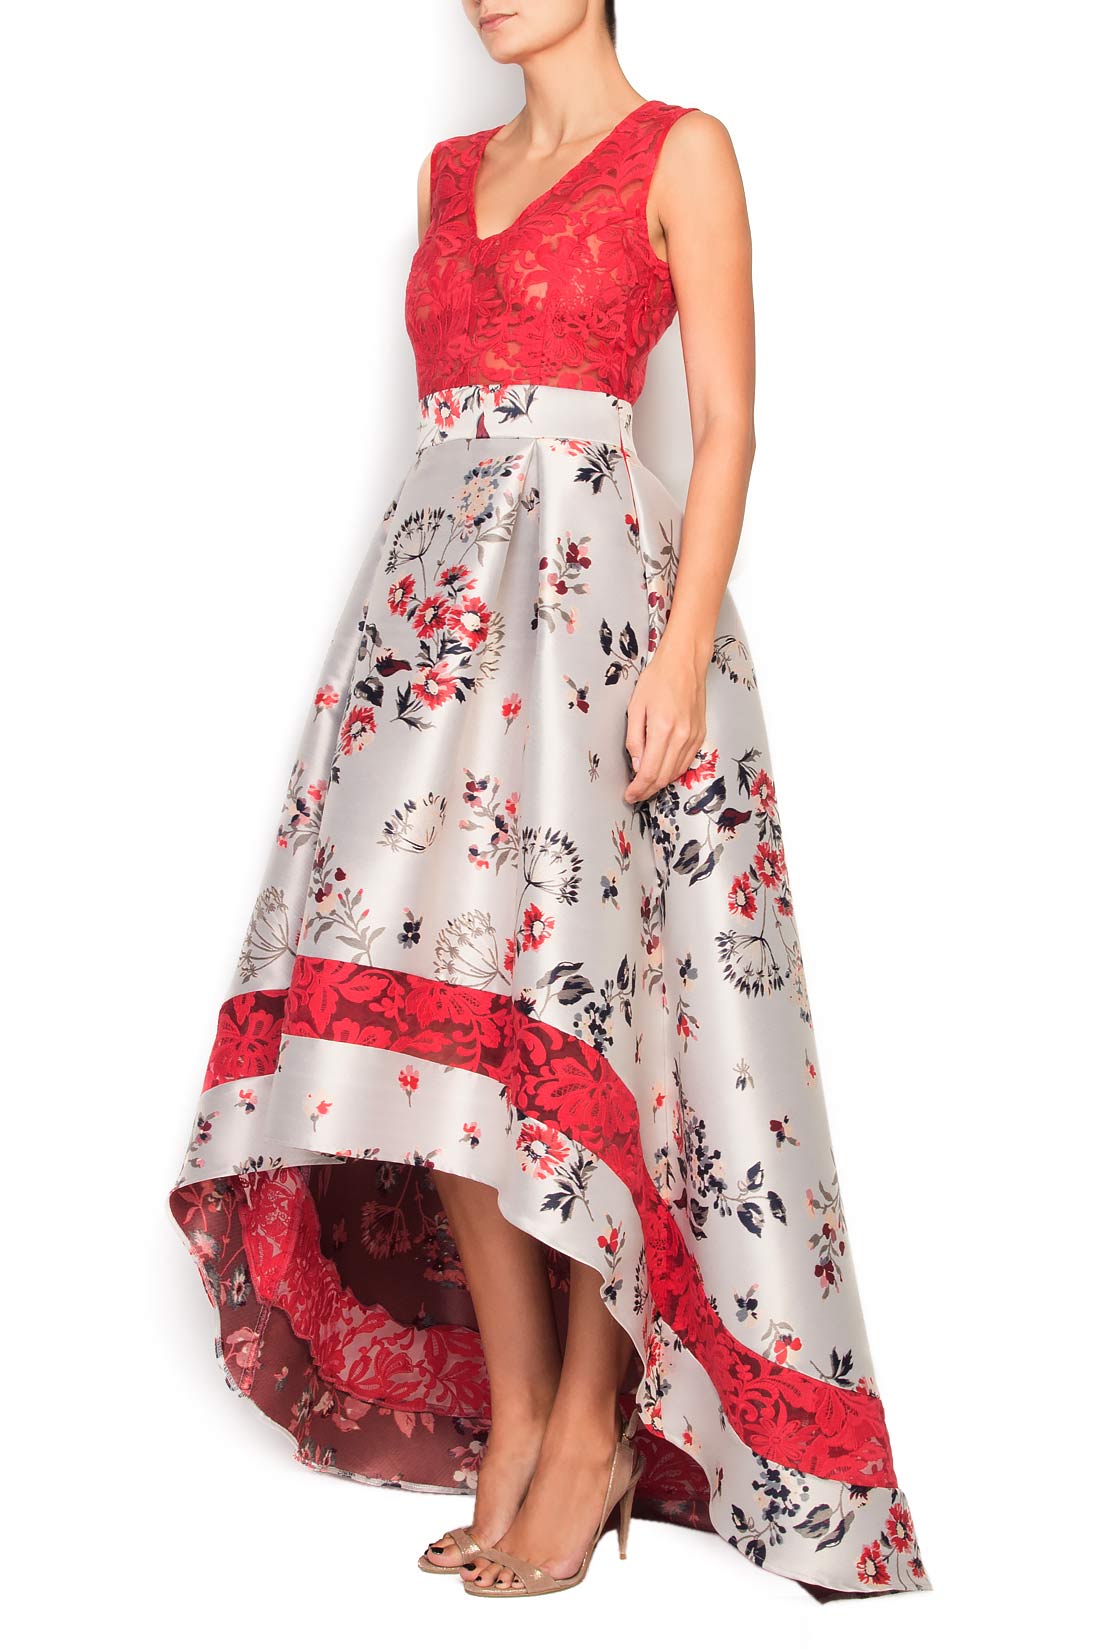 Cloth dress with floral print and lace Elena Perseil image 1